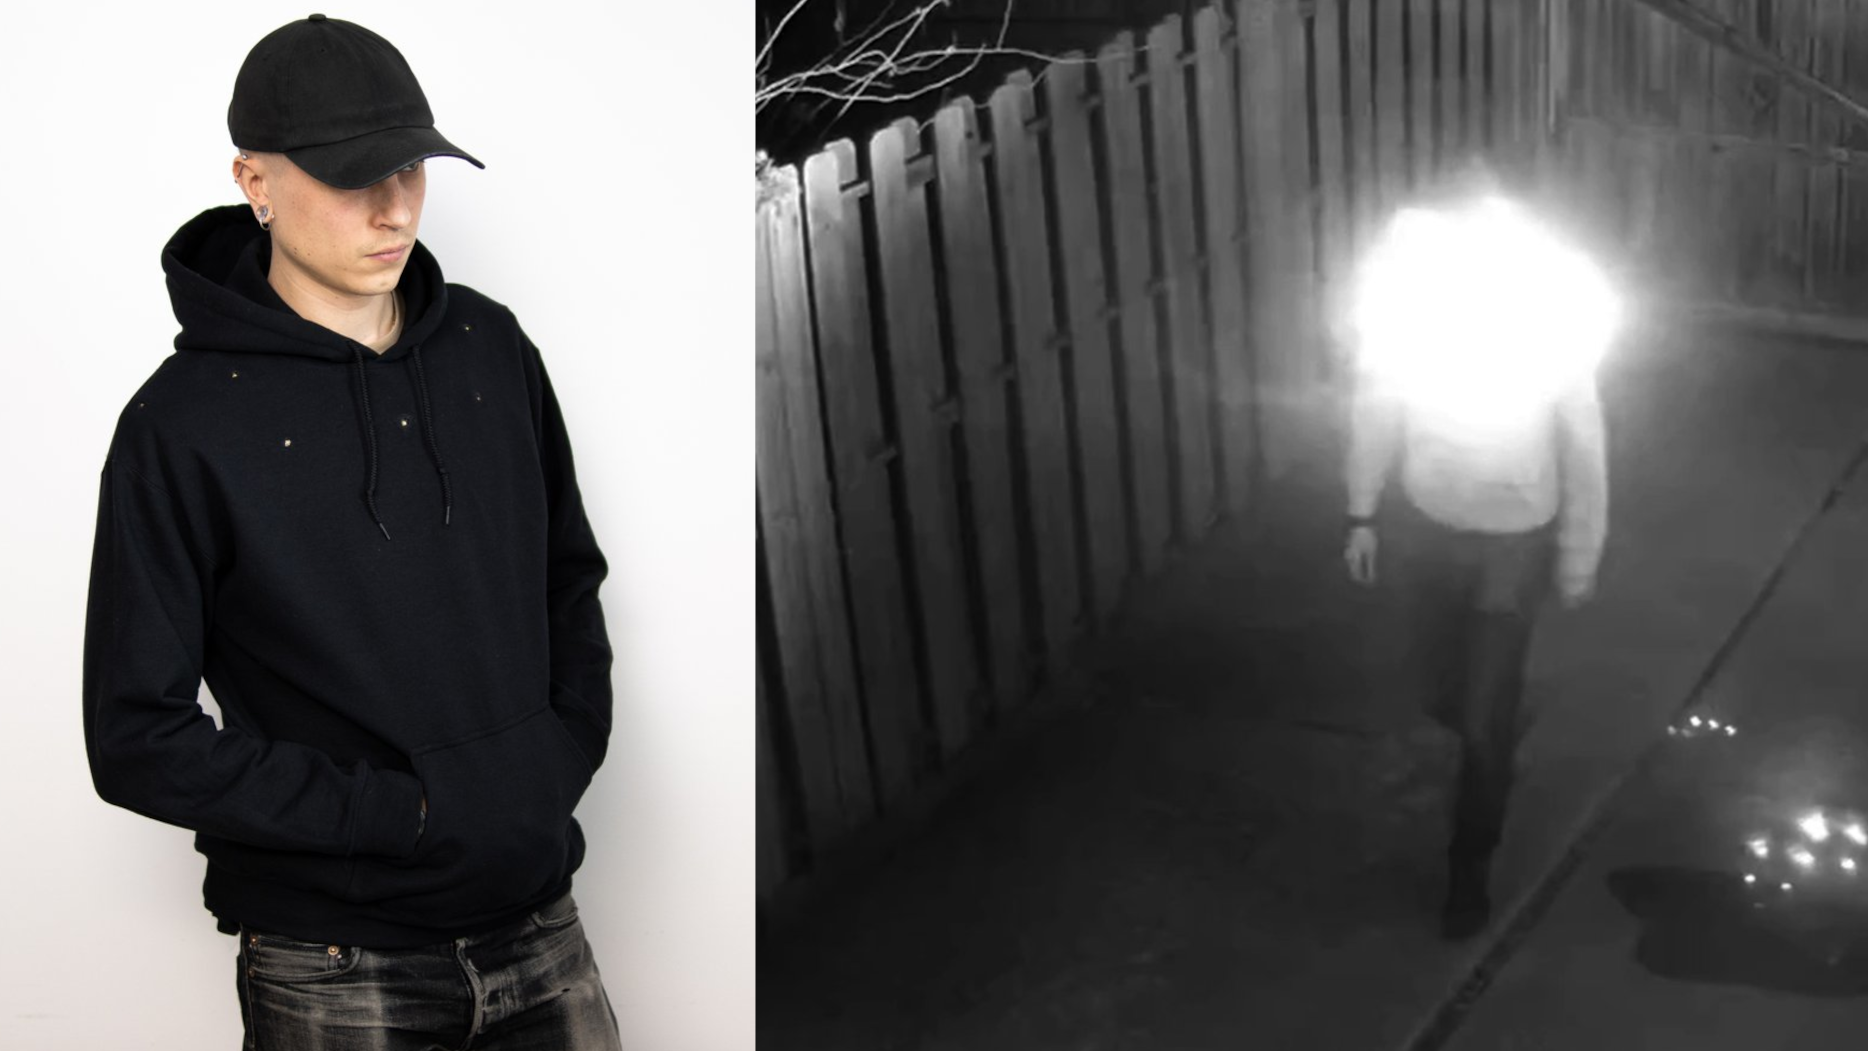 Adversarial IR Hoodie Lets You Own The Night In Anonymity